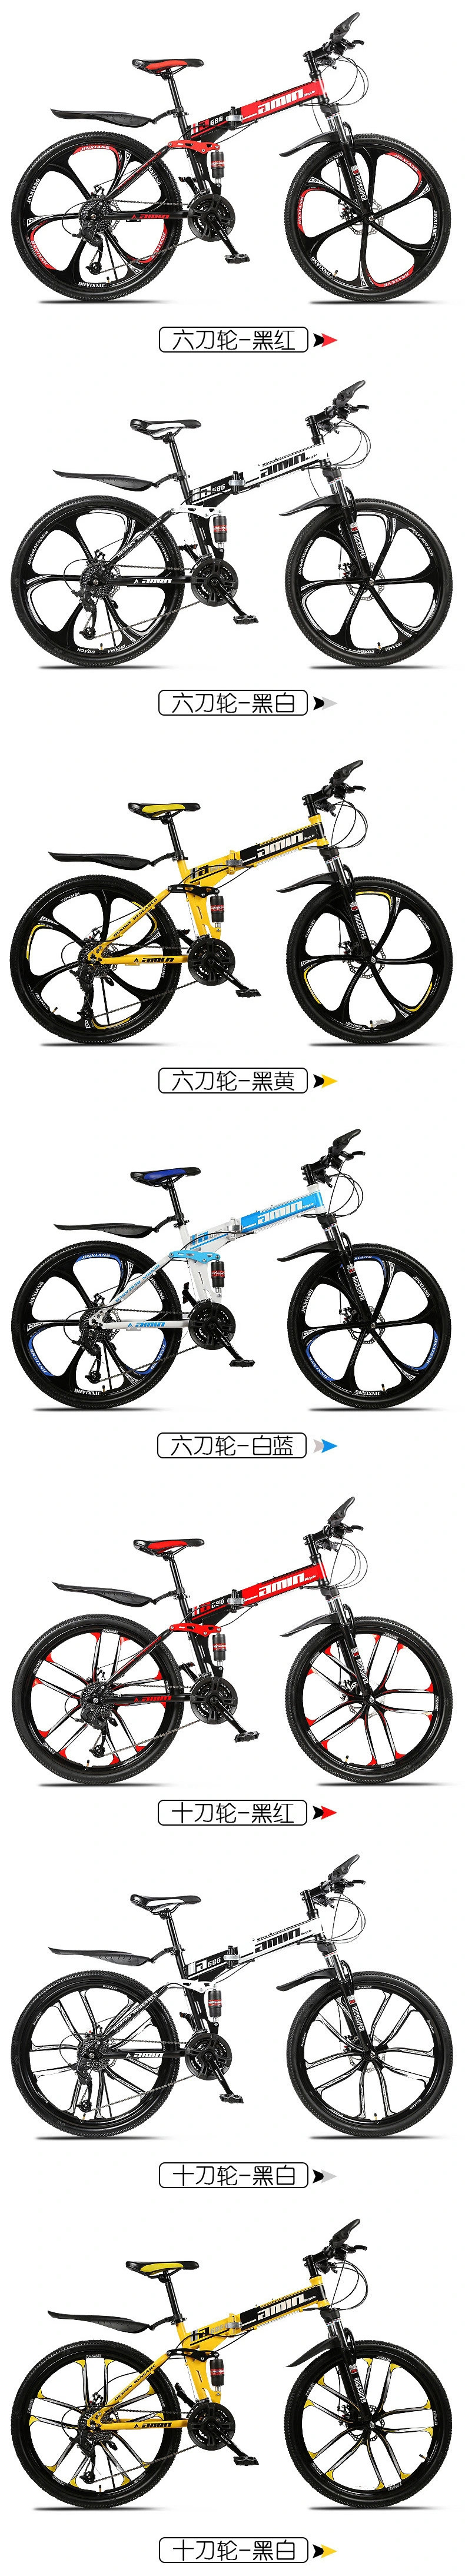 Excellent Brake Damping System Mountain Foldable Sports Bike Urban Trend Variable Speed Bike 24, 26 Inch